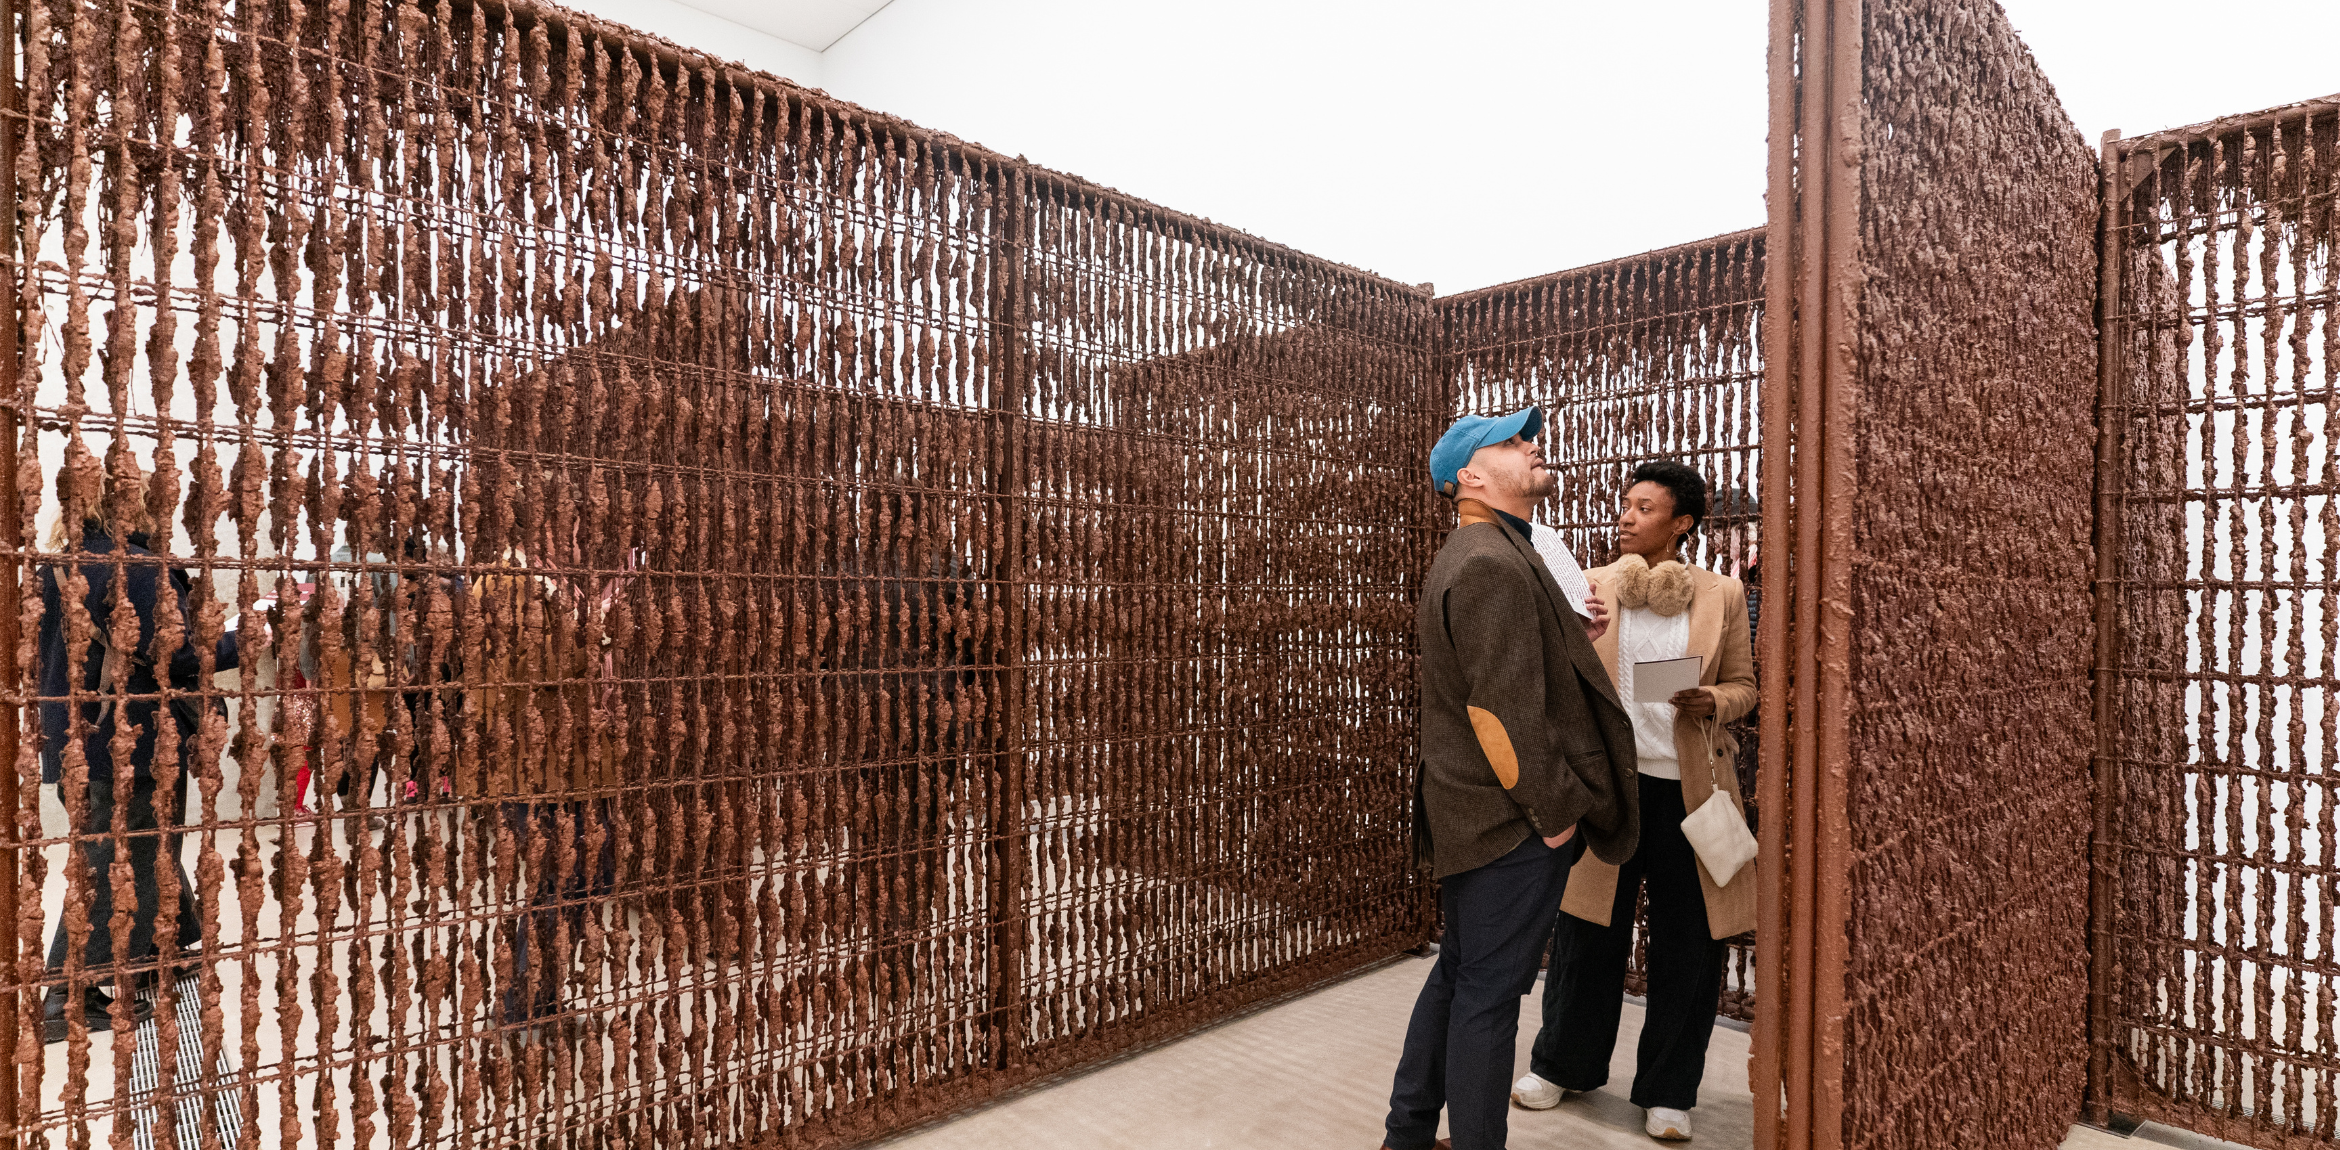 The image shows two people standing and interacting in front of a large, intricate structure made of what appears to be rusted metal bars with irregularly shaped material attached to them. The structure resembles a maze or enclosure with walls made of closely spaced vertical and horizontal bars, giving it a grid-like appearance. The two people, one wearing a blue cap and the other holding papers, seem to be engaged in conversation or examining the artwork.